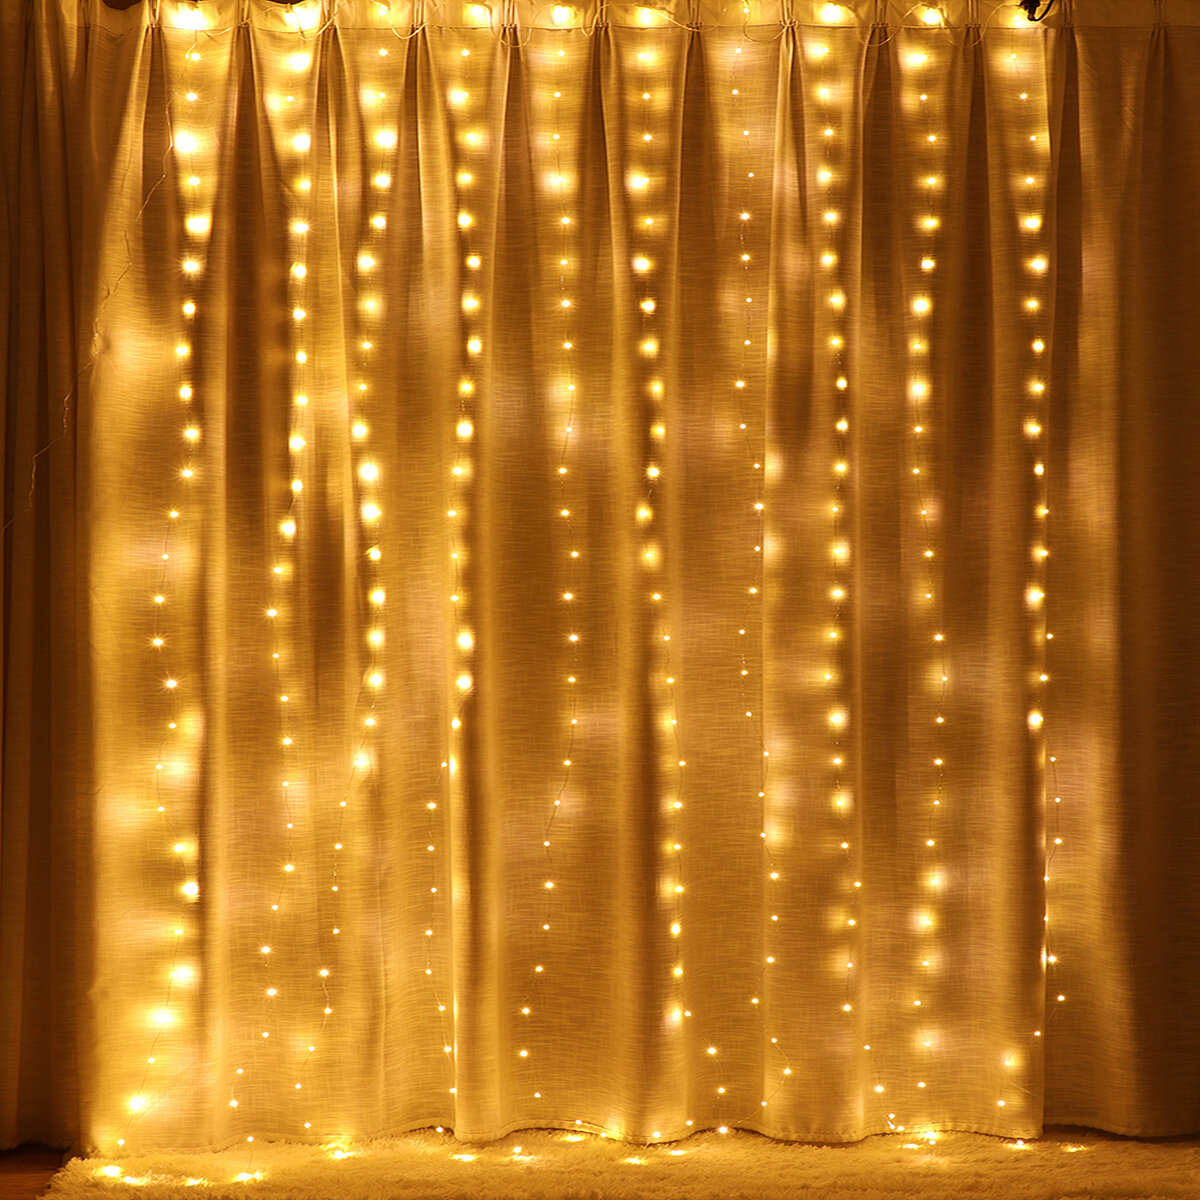 3M*2M USB 200LED Curtain Window Fairy String Light Twinkle Christmas Party Wedding Holiday Outdoor Lamp